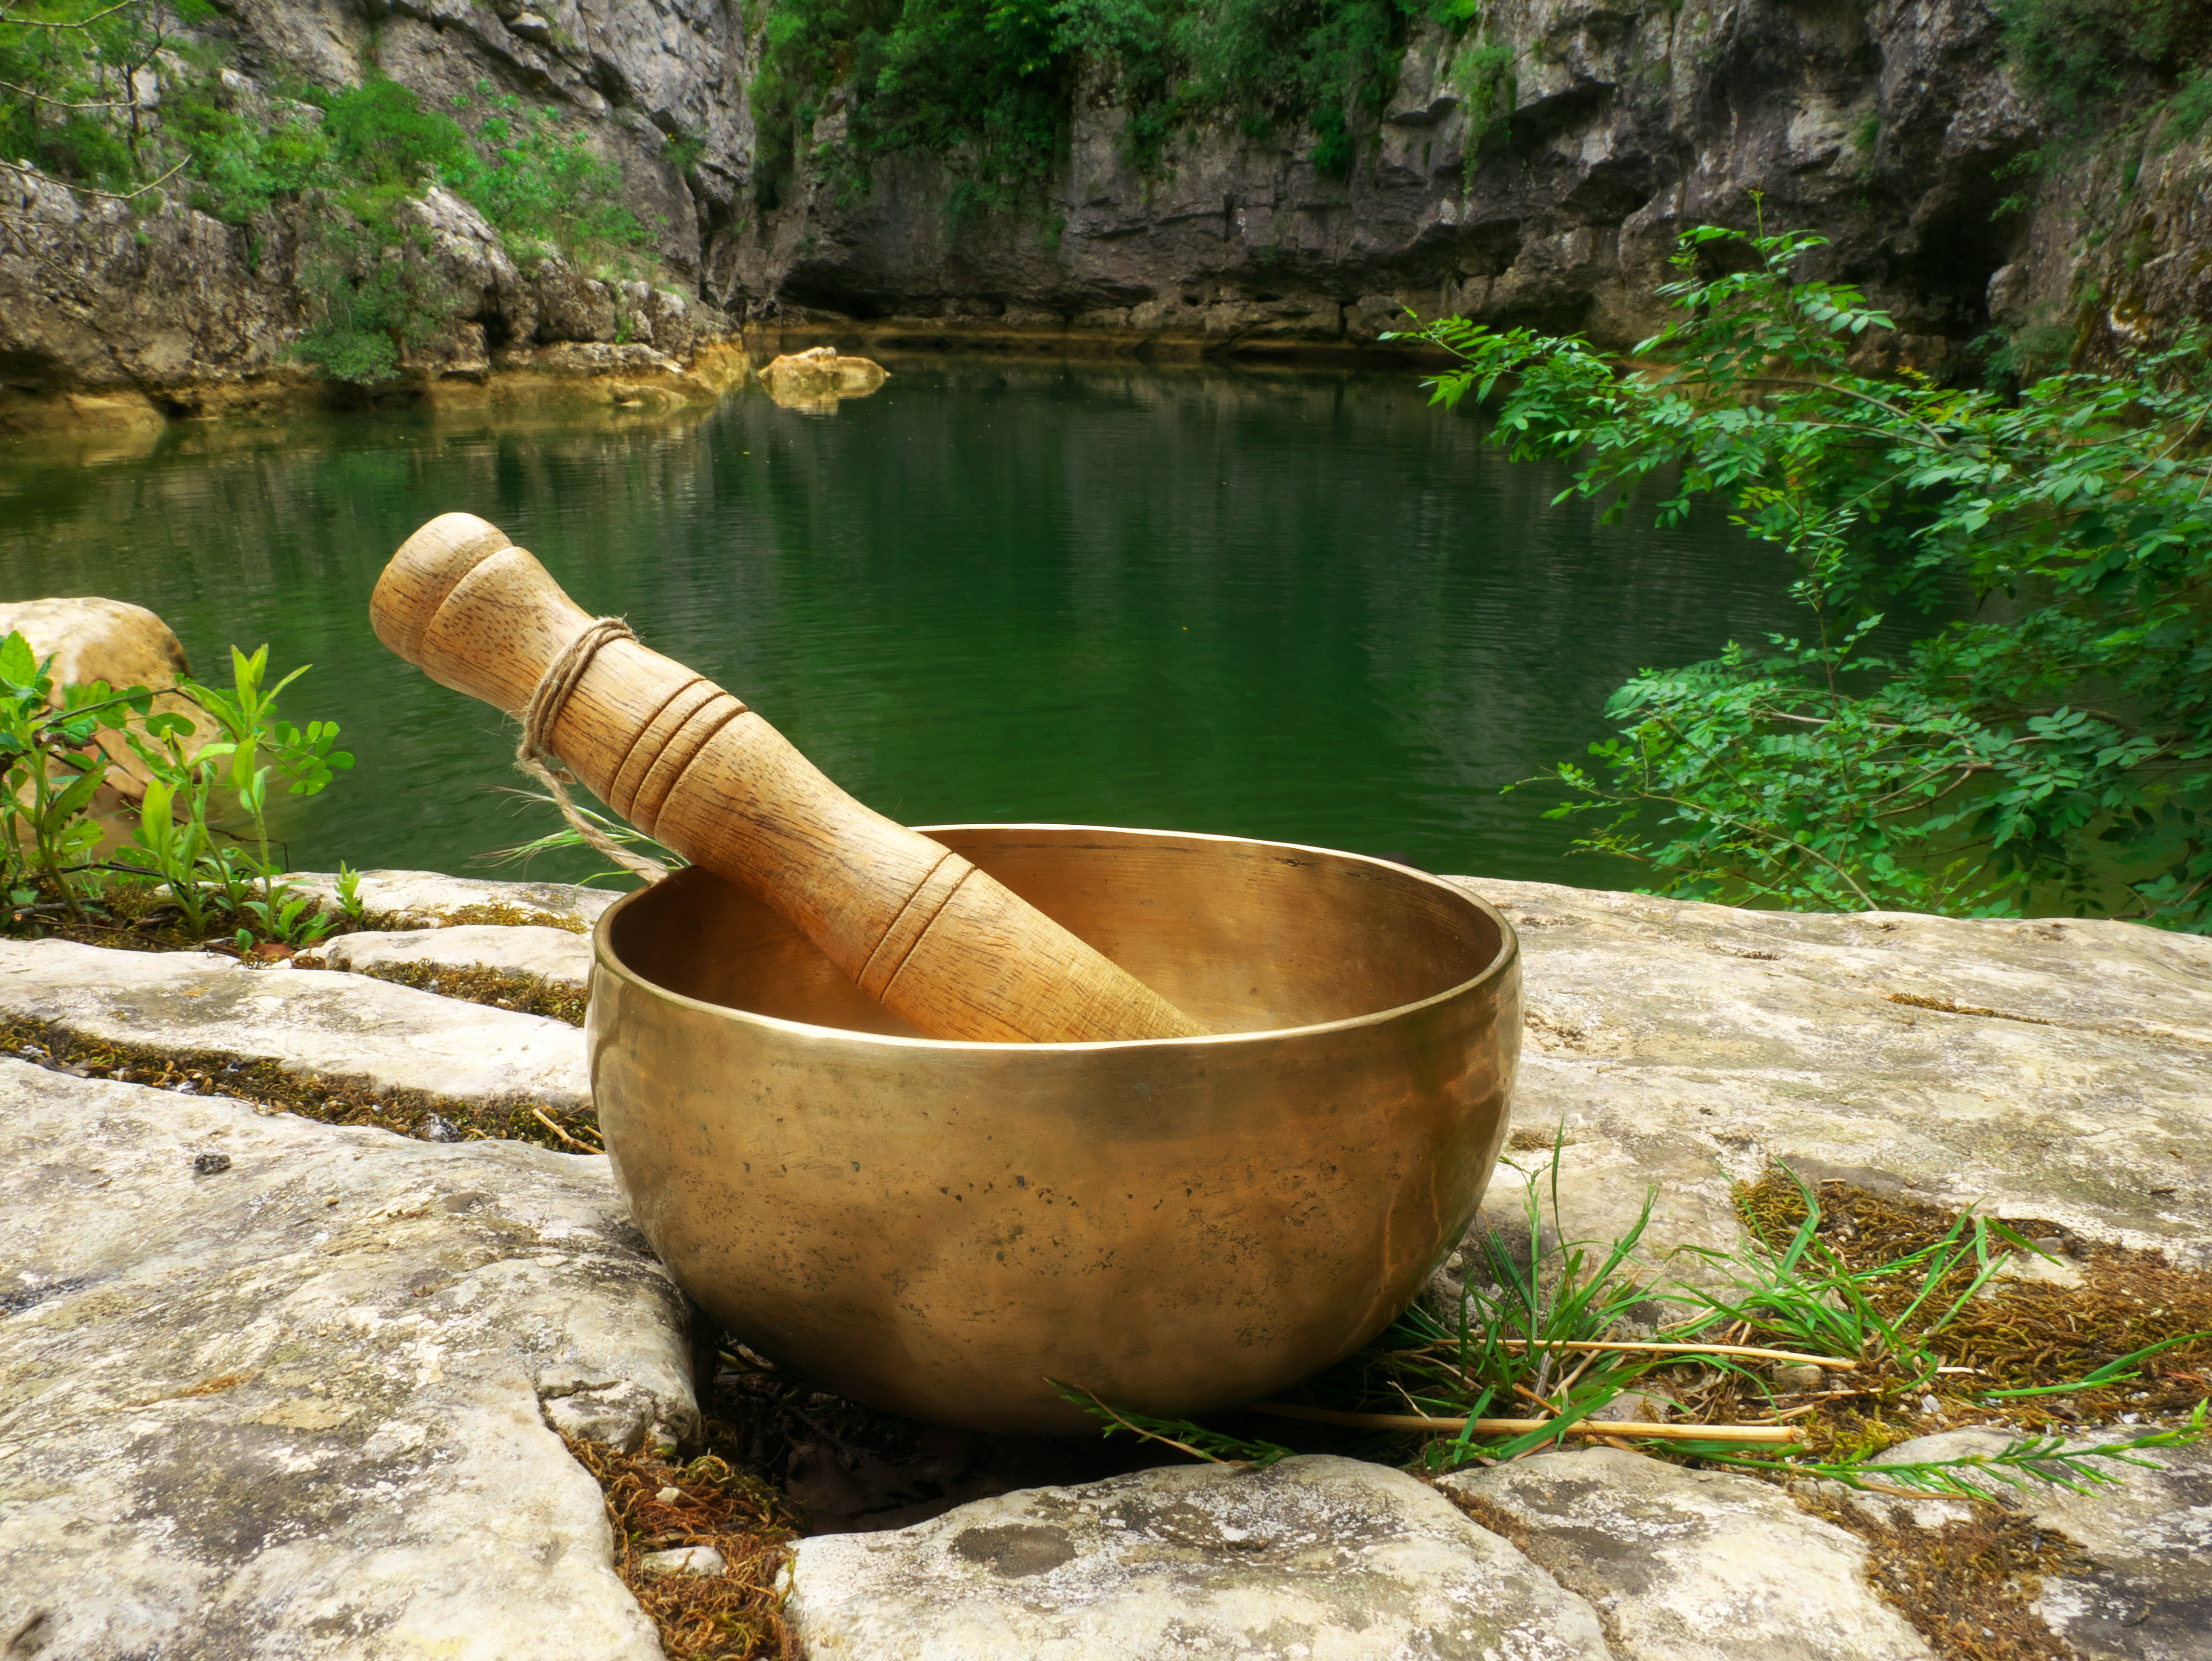 Closeup Of A Singing Bowl Placed In Nature With The River In The Background